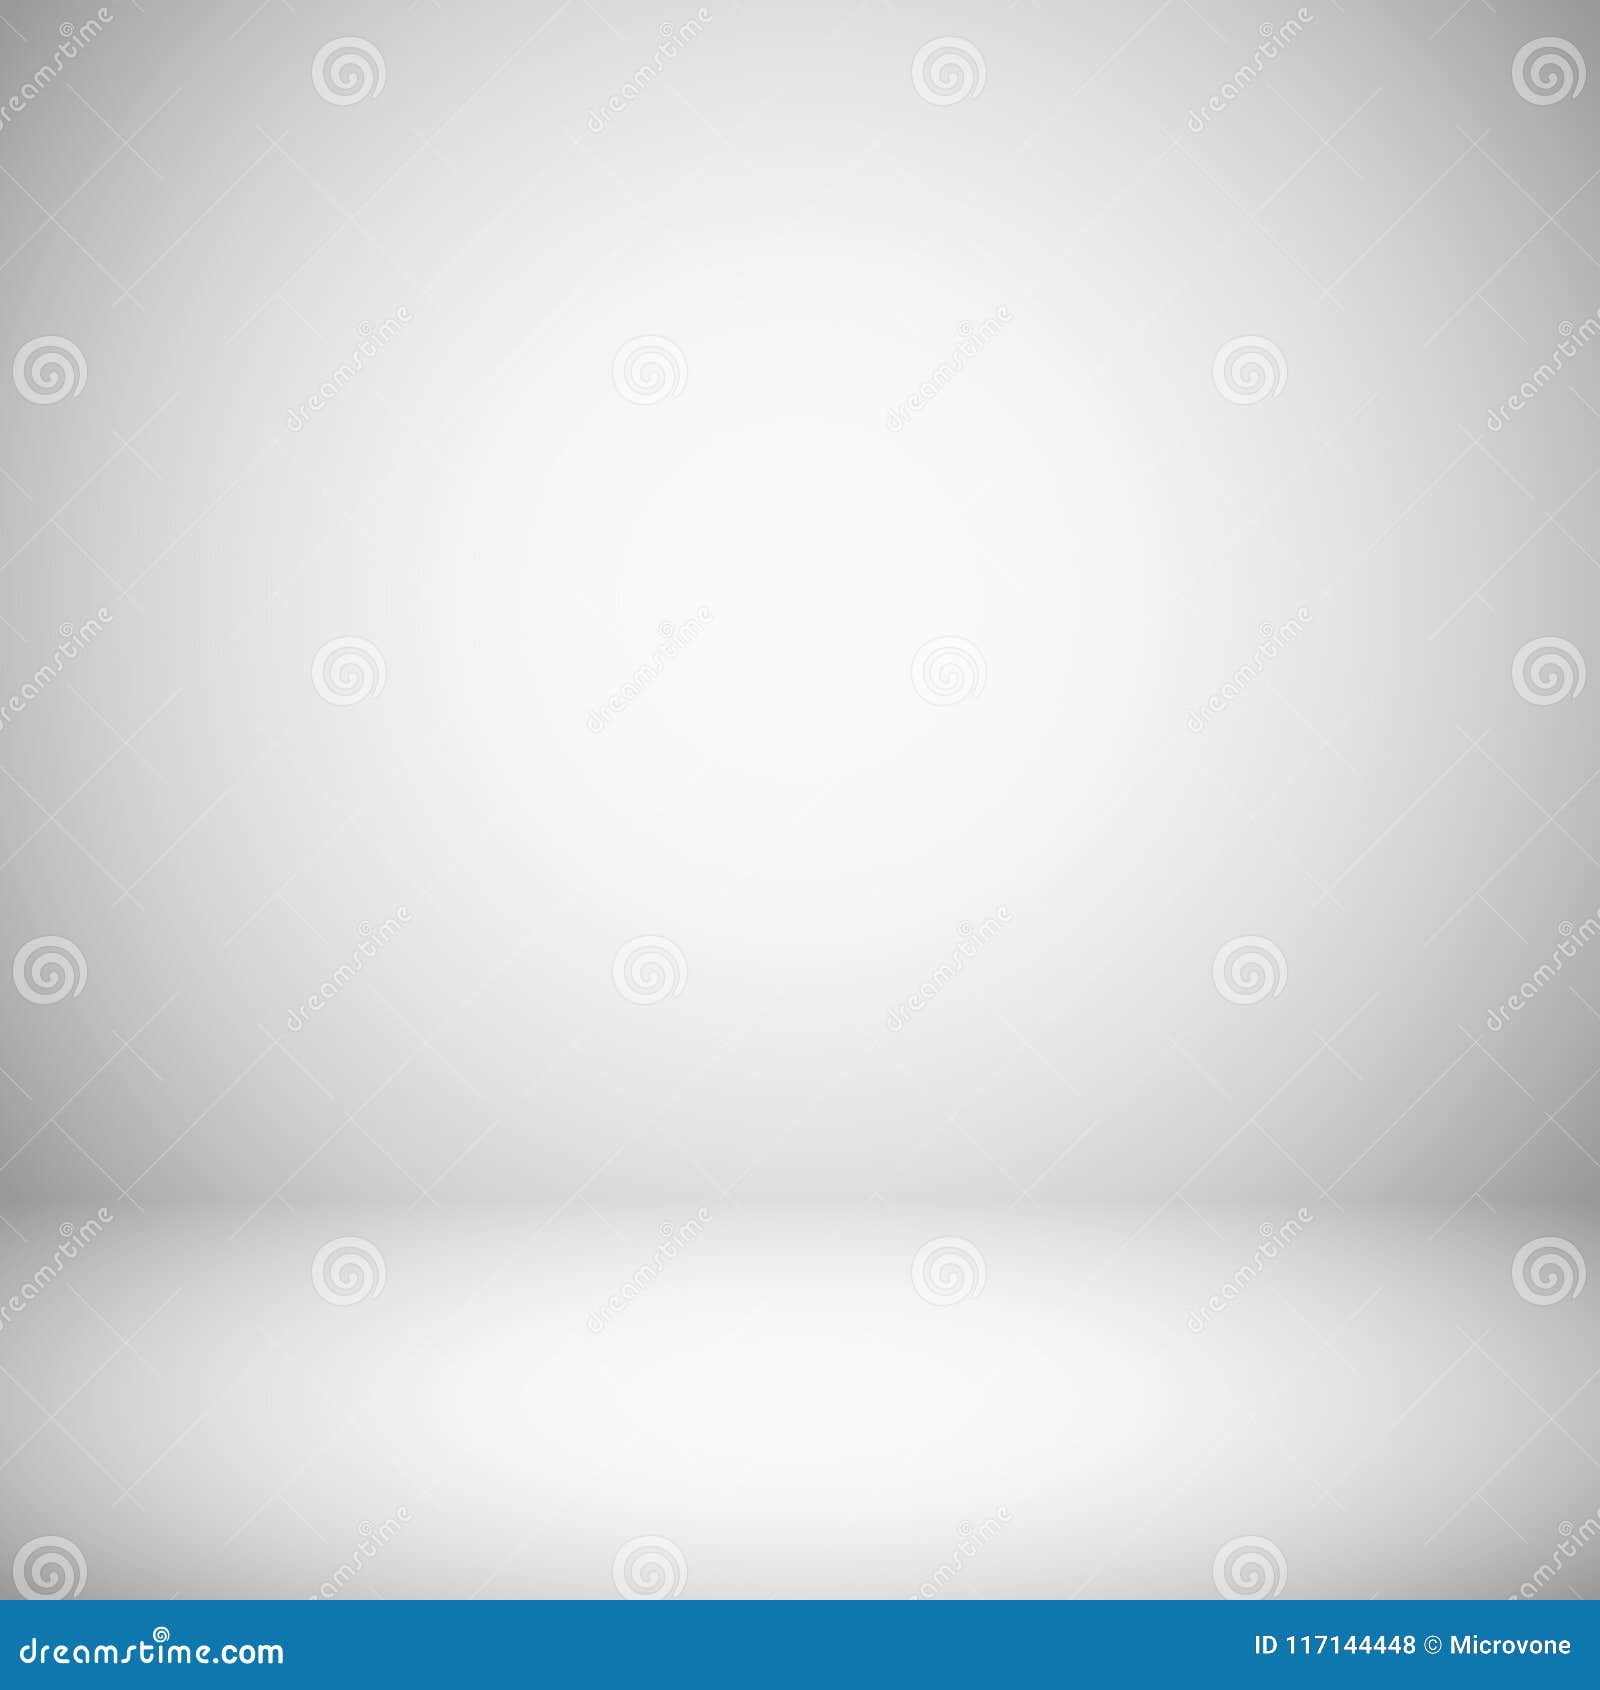 Empty White and Gray Light Studio Room Interior. 3d Plain Grey Soft  Gradient Vector Background Stock Vector - Illustration of place, shade:  117144448